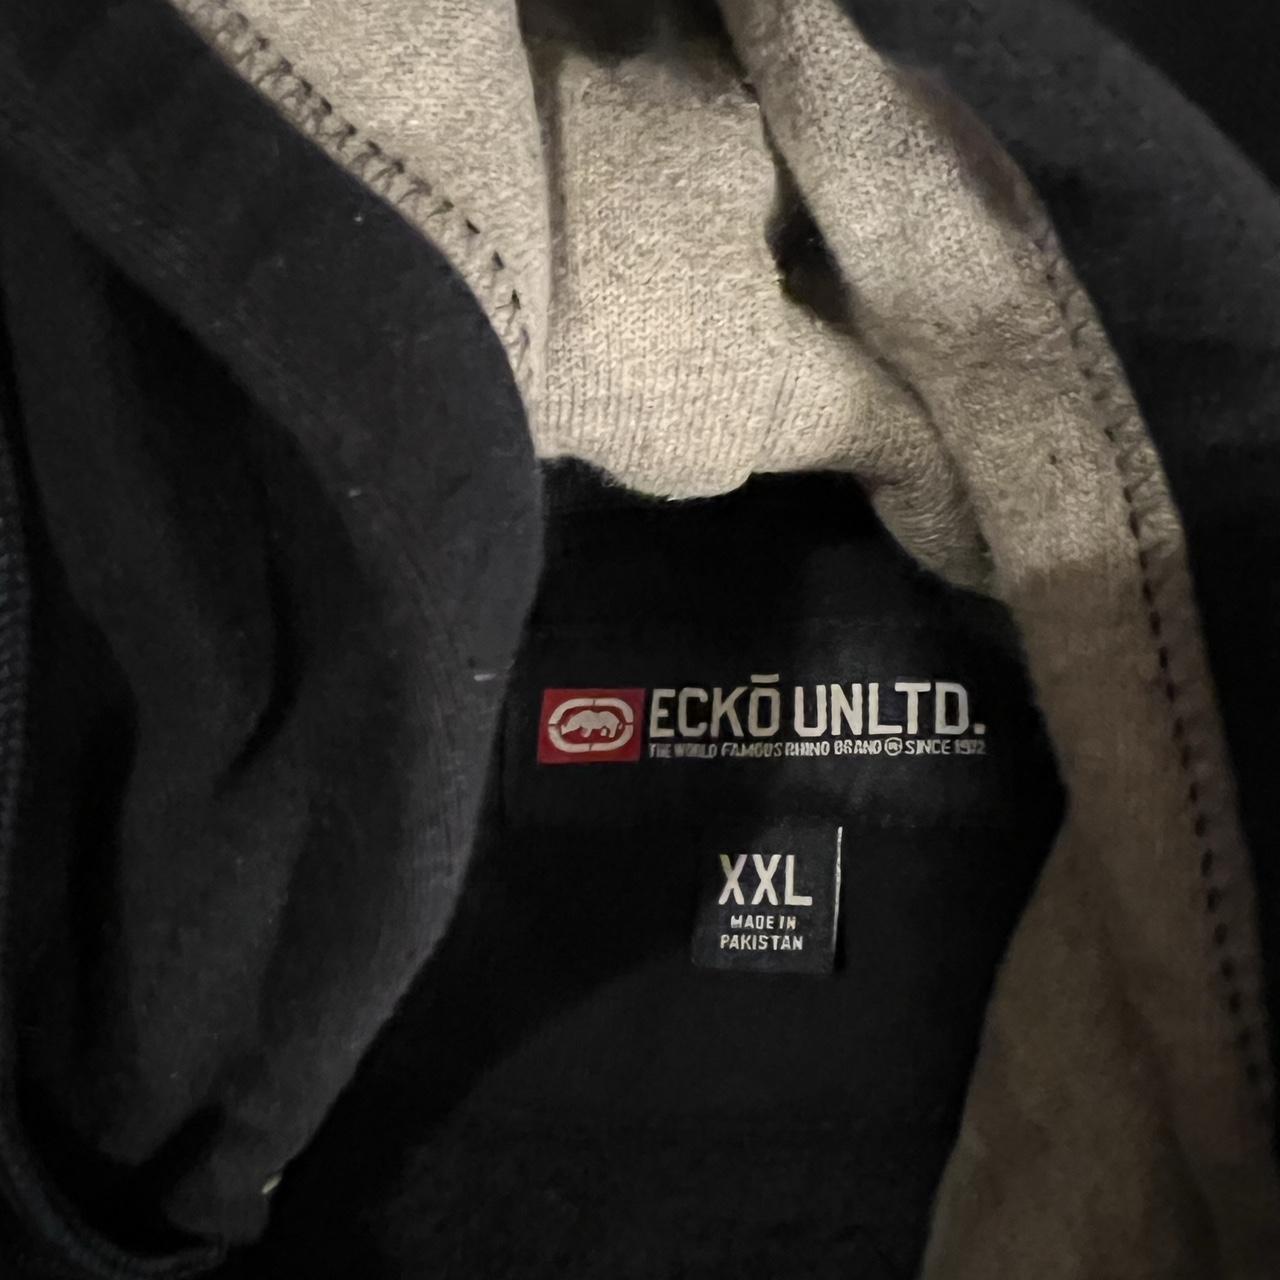 Ecko Untld hoodie from 2000’s with a crazy NYC... - Depop